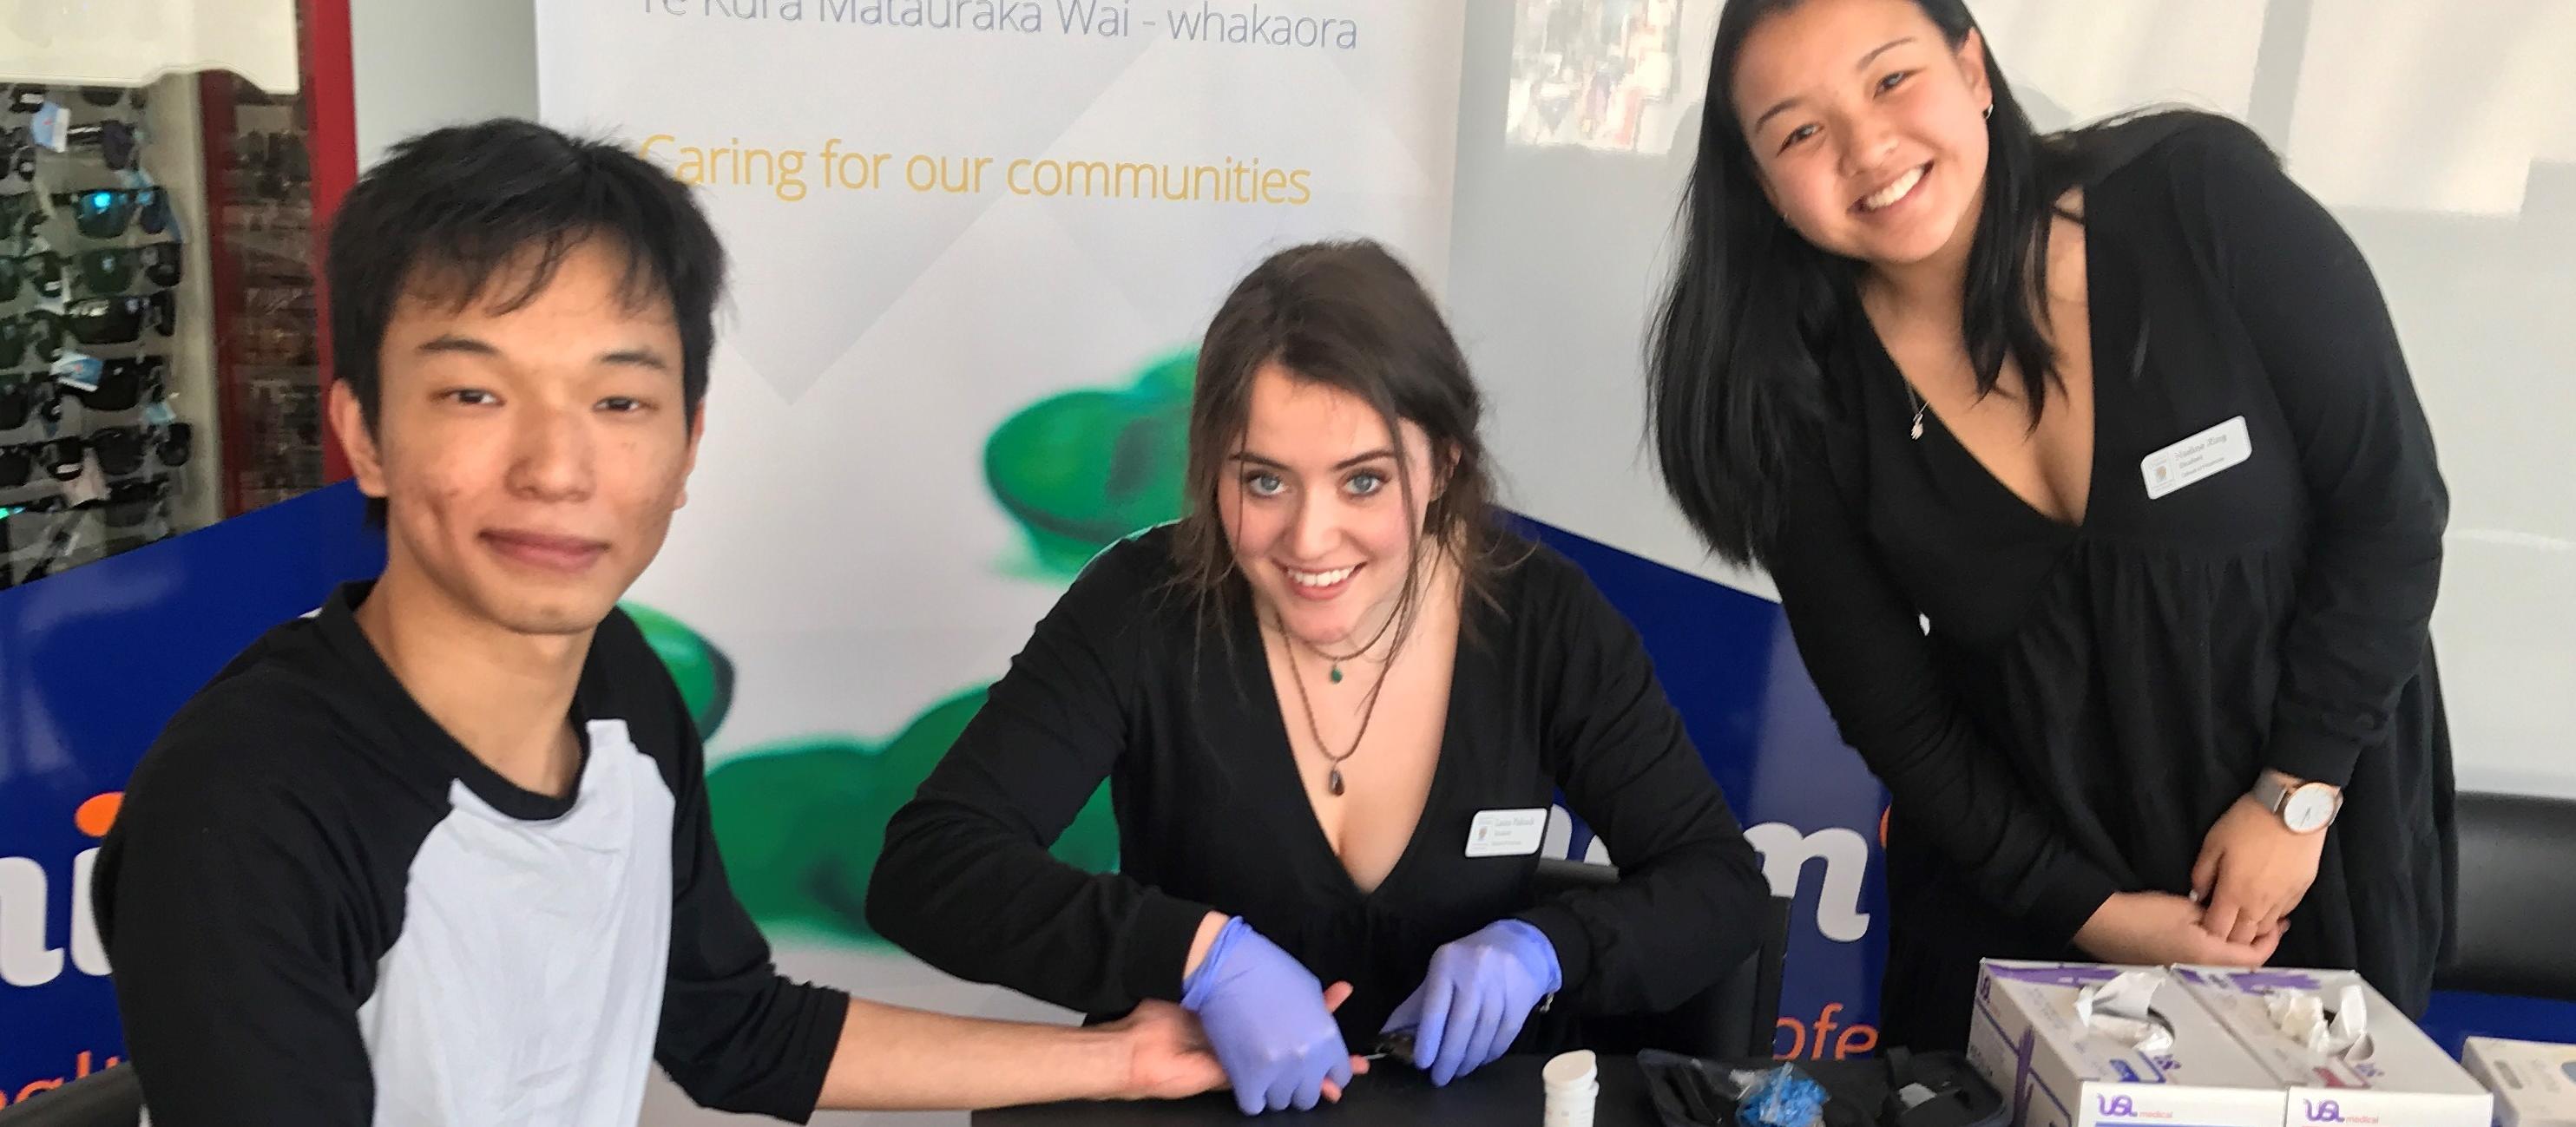 Otago pharmacy students Laura Pidcock (centre) and Nadine King offer a blood glucose test to Dunedin resident Van Chanusorn